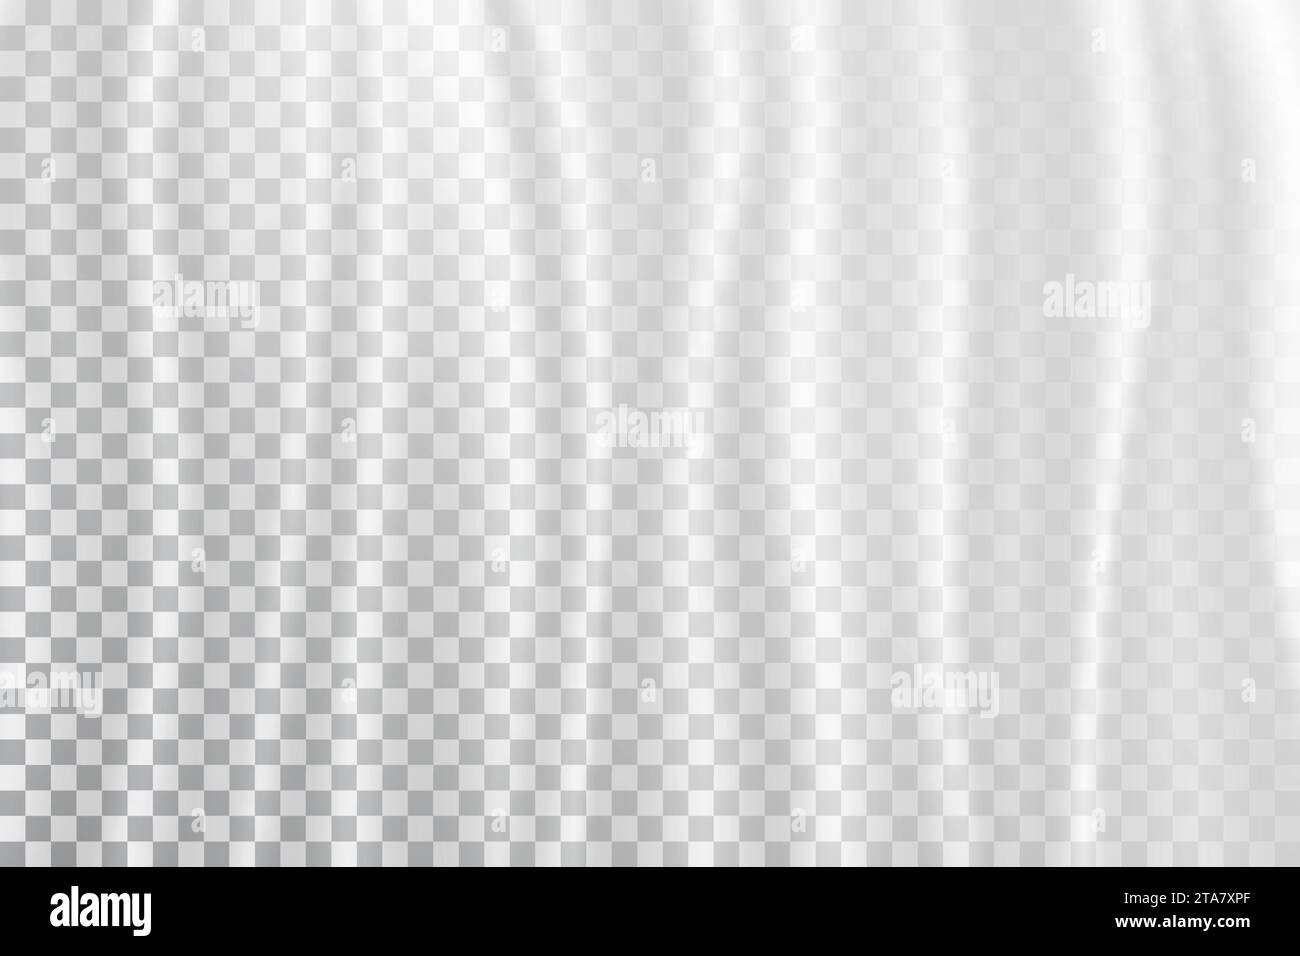 Curtain white color for window. Sheer curtains on wall. Smooth 3d veil. Chiffon close top view. Hanging silk flatlay pattern for overlay effect Stock Vector